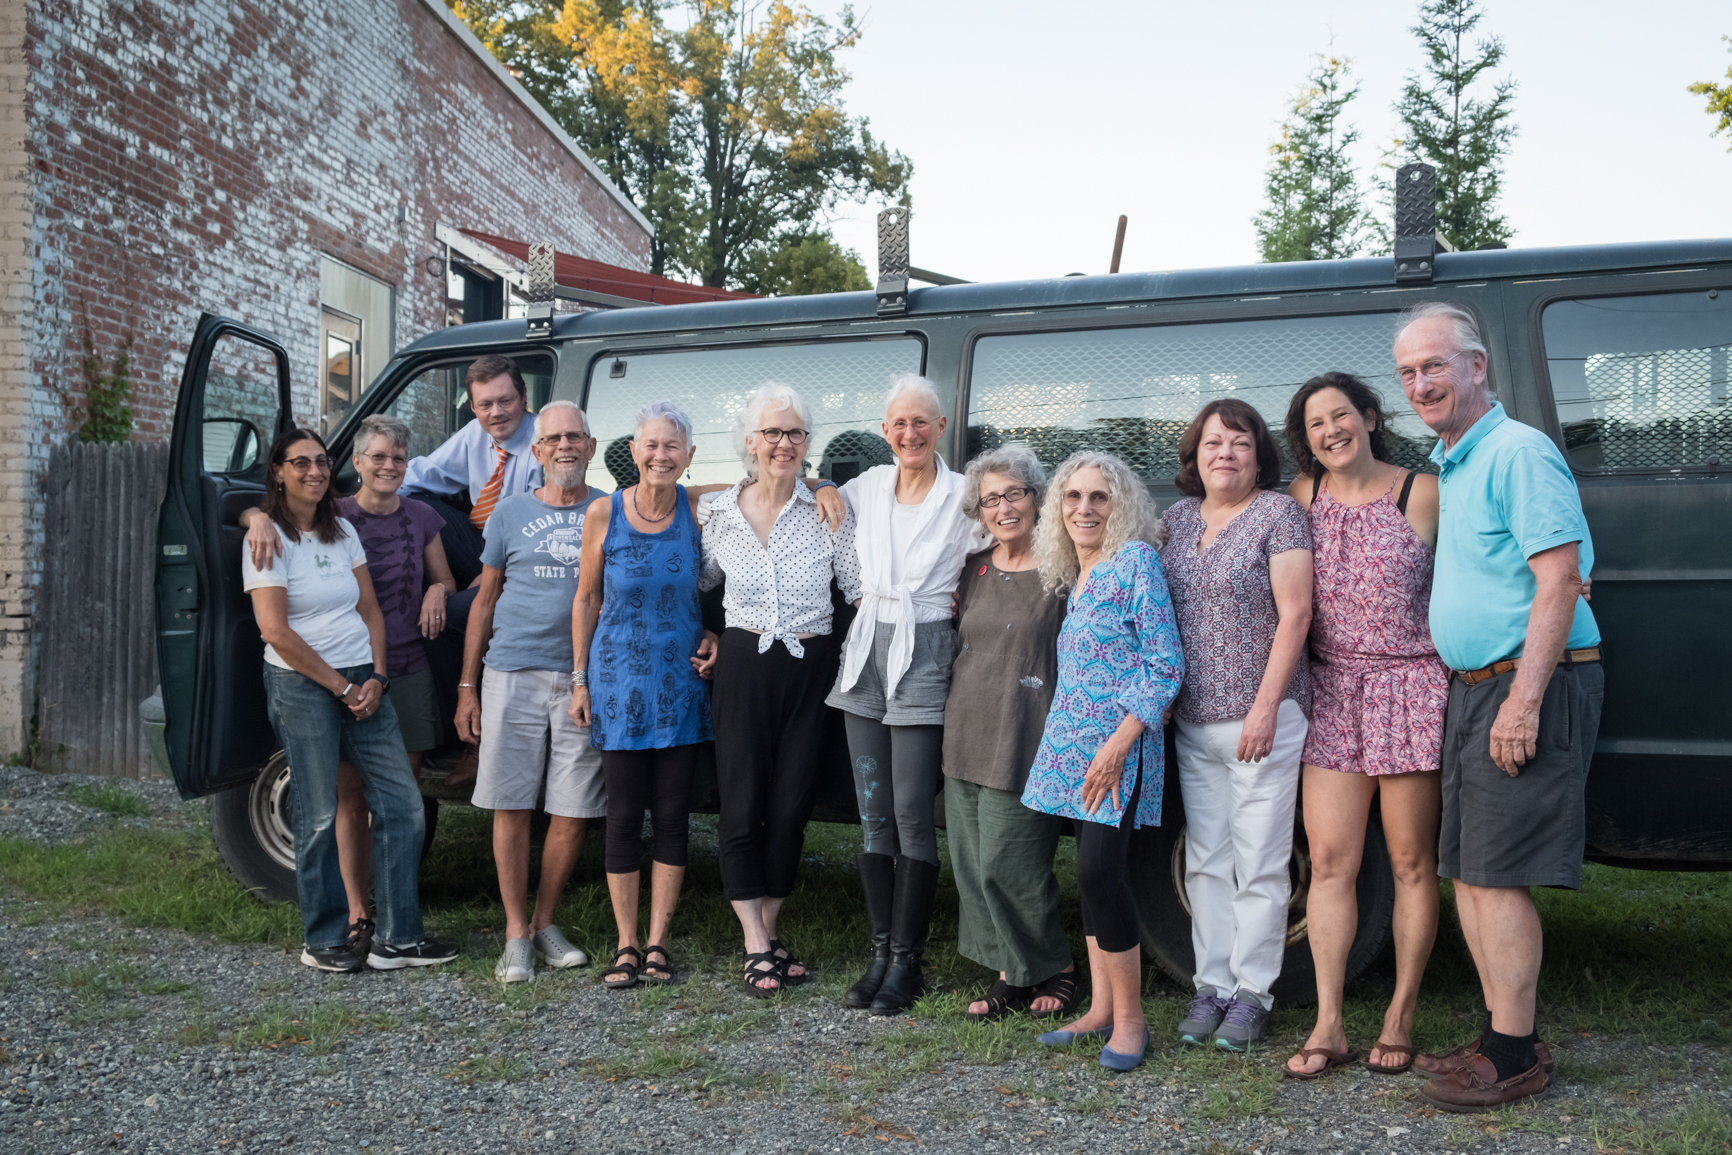 PHOTO: Grannies and supporters pose in front of the van that will be used to caravan from New York to the U.S.-Mexico border.
